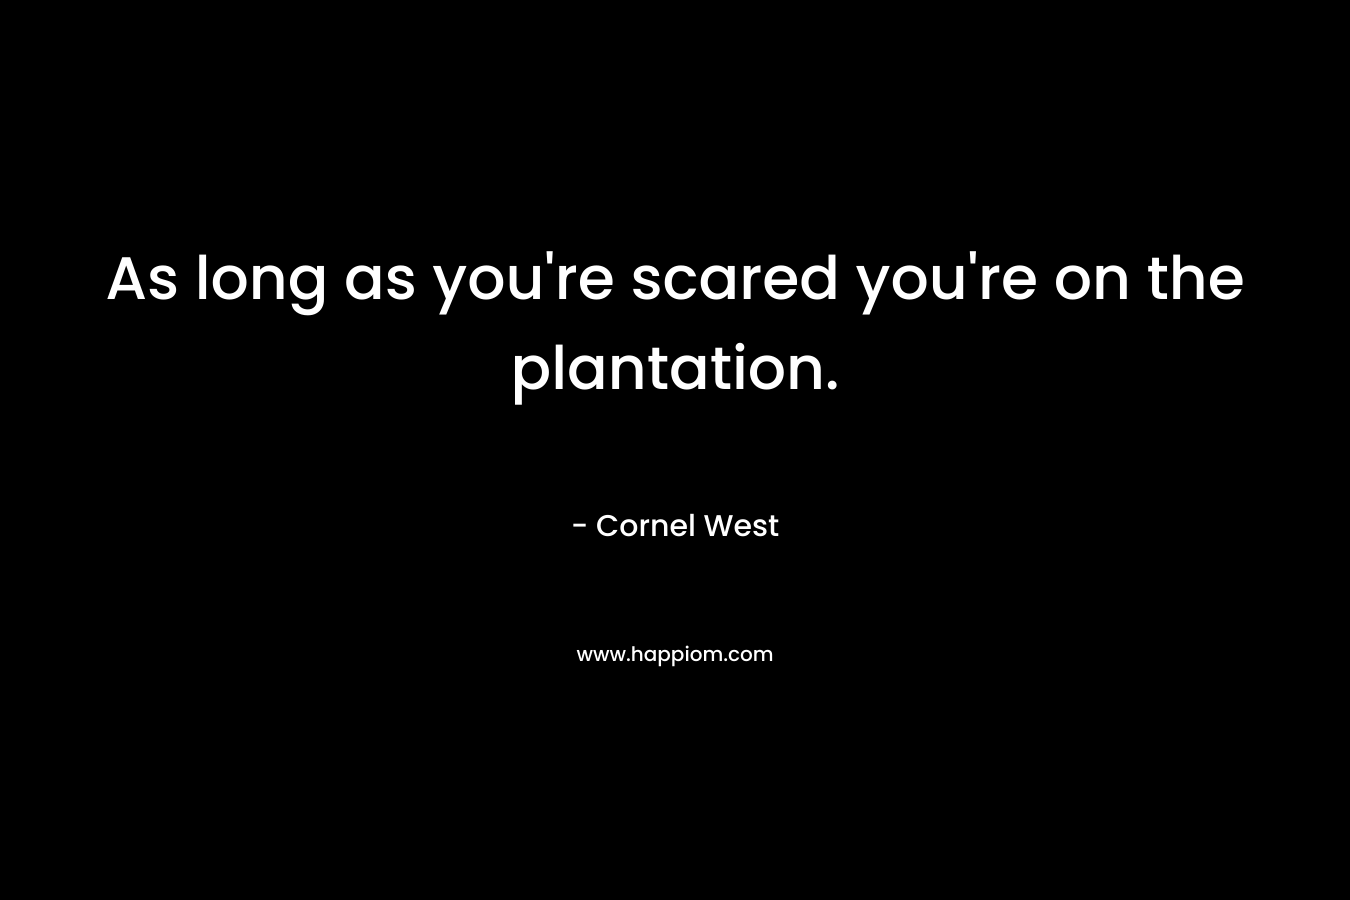 As long as you’re scared you’re on the plantation. – Cornel West